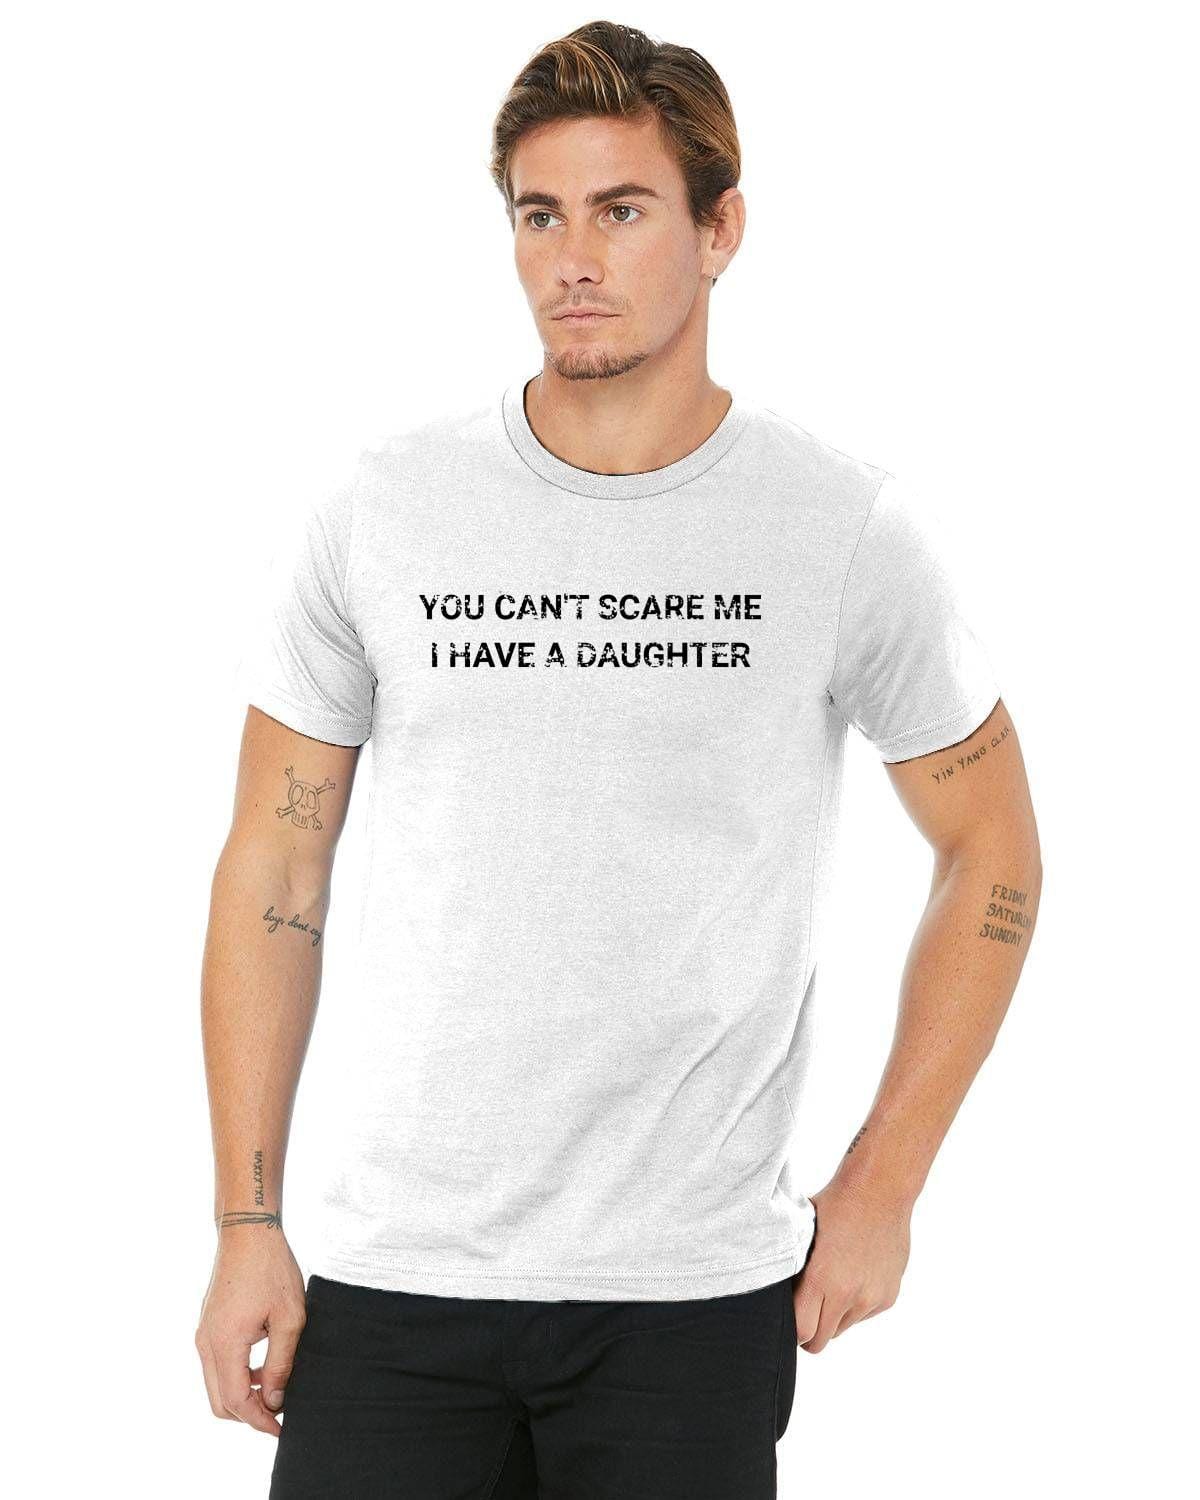 You Can't Scare Me, I Have A Daughter T-Shirt - Father's Day, Birthday, Any Day!